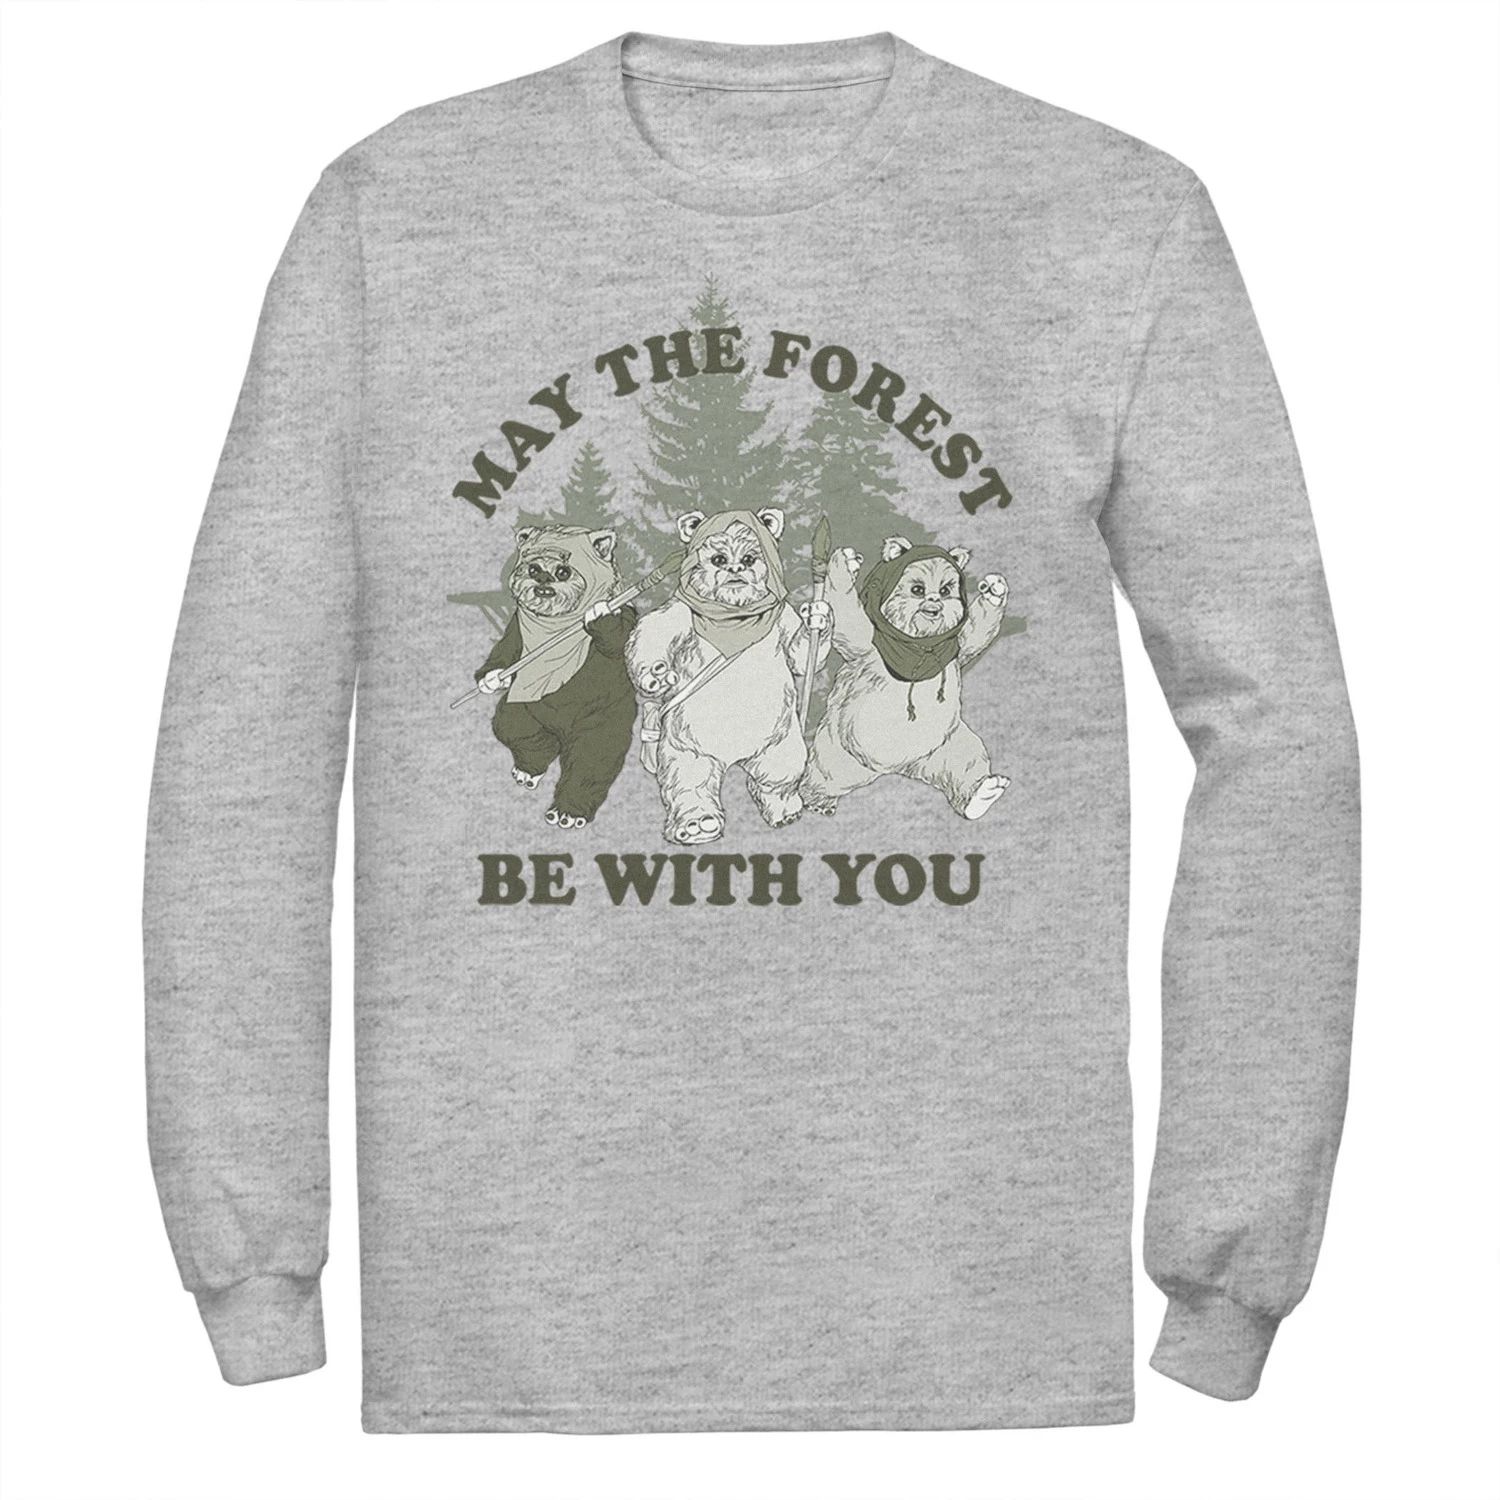 Мужская футболка Star Wars Ewoks May The Forest Be With You printio футболка классическая may the forest be with you